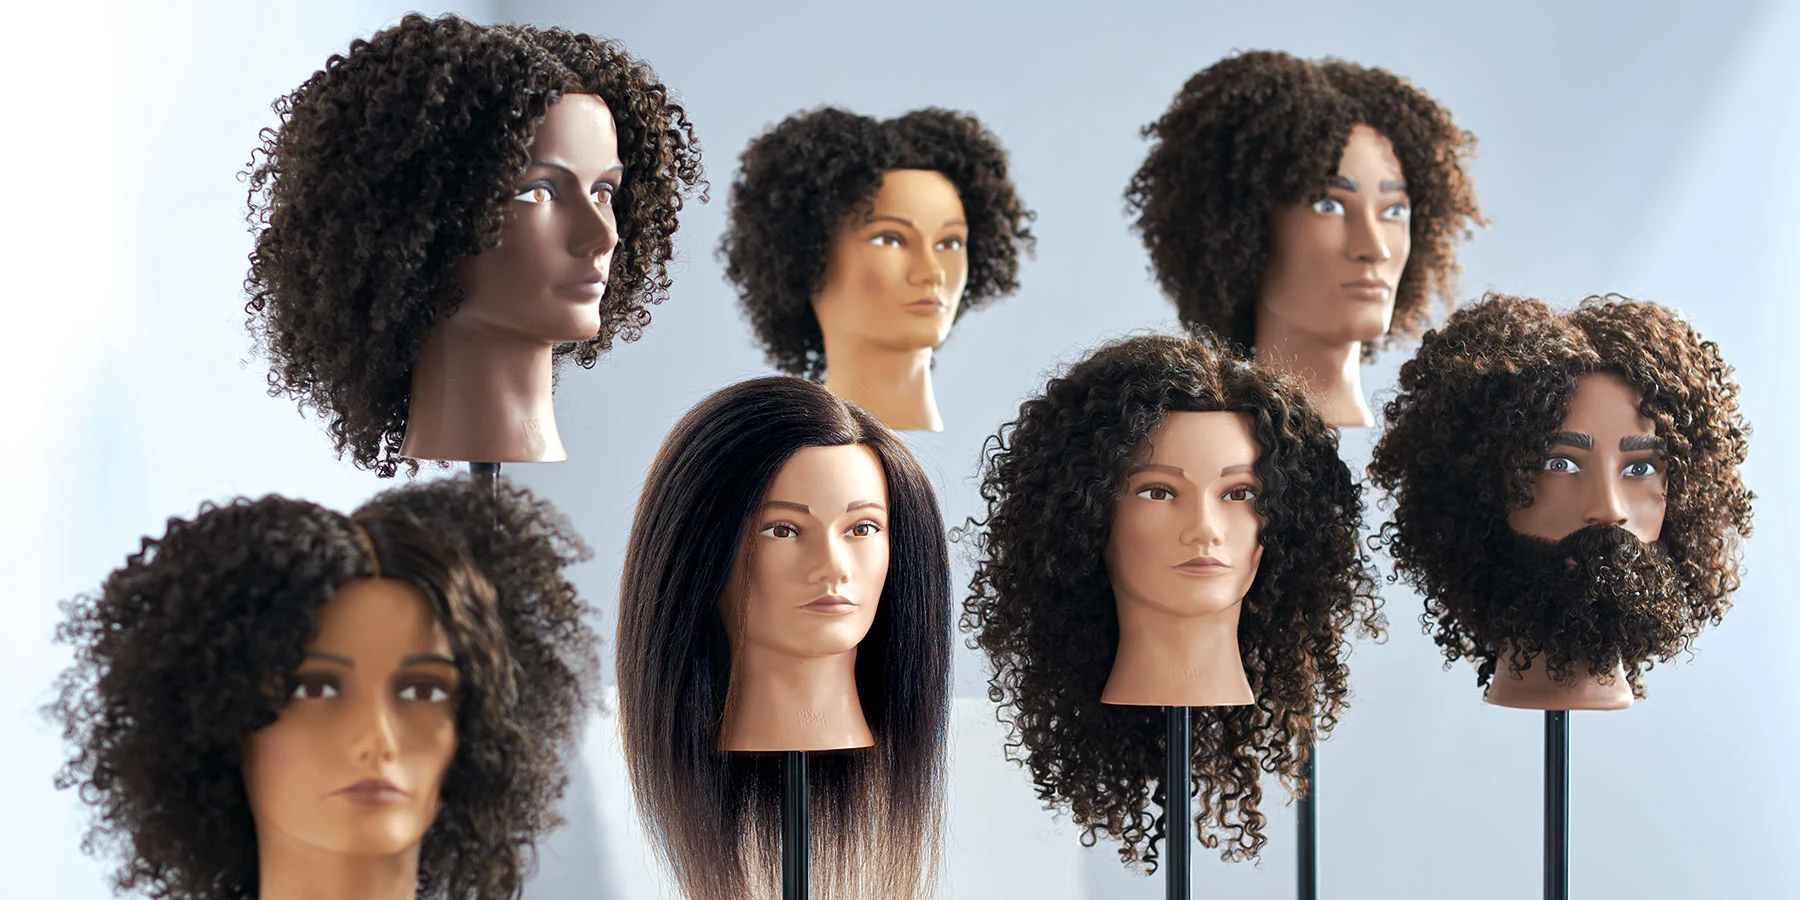 Embrace the Diversity: Meet Our Mannequins with Textured Hair